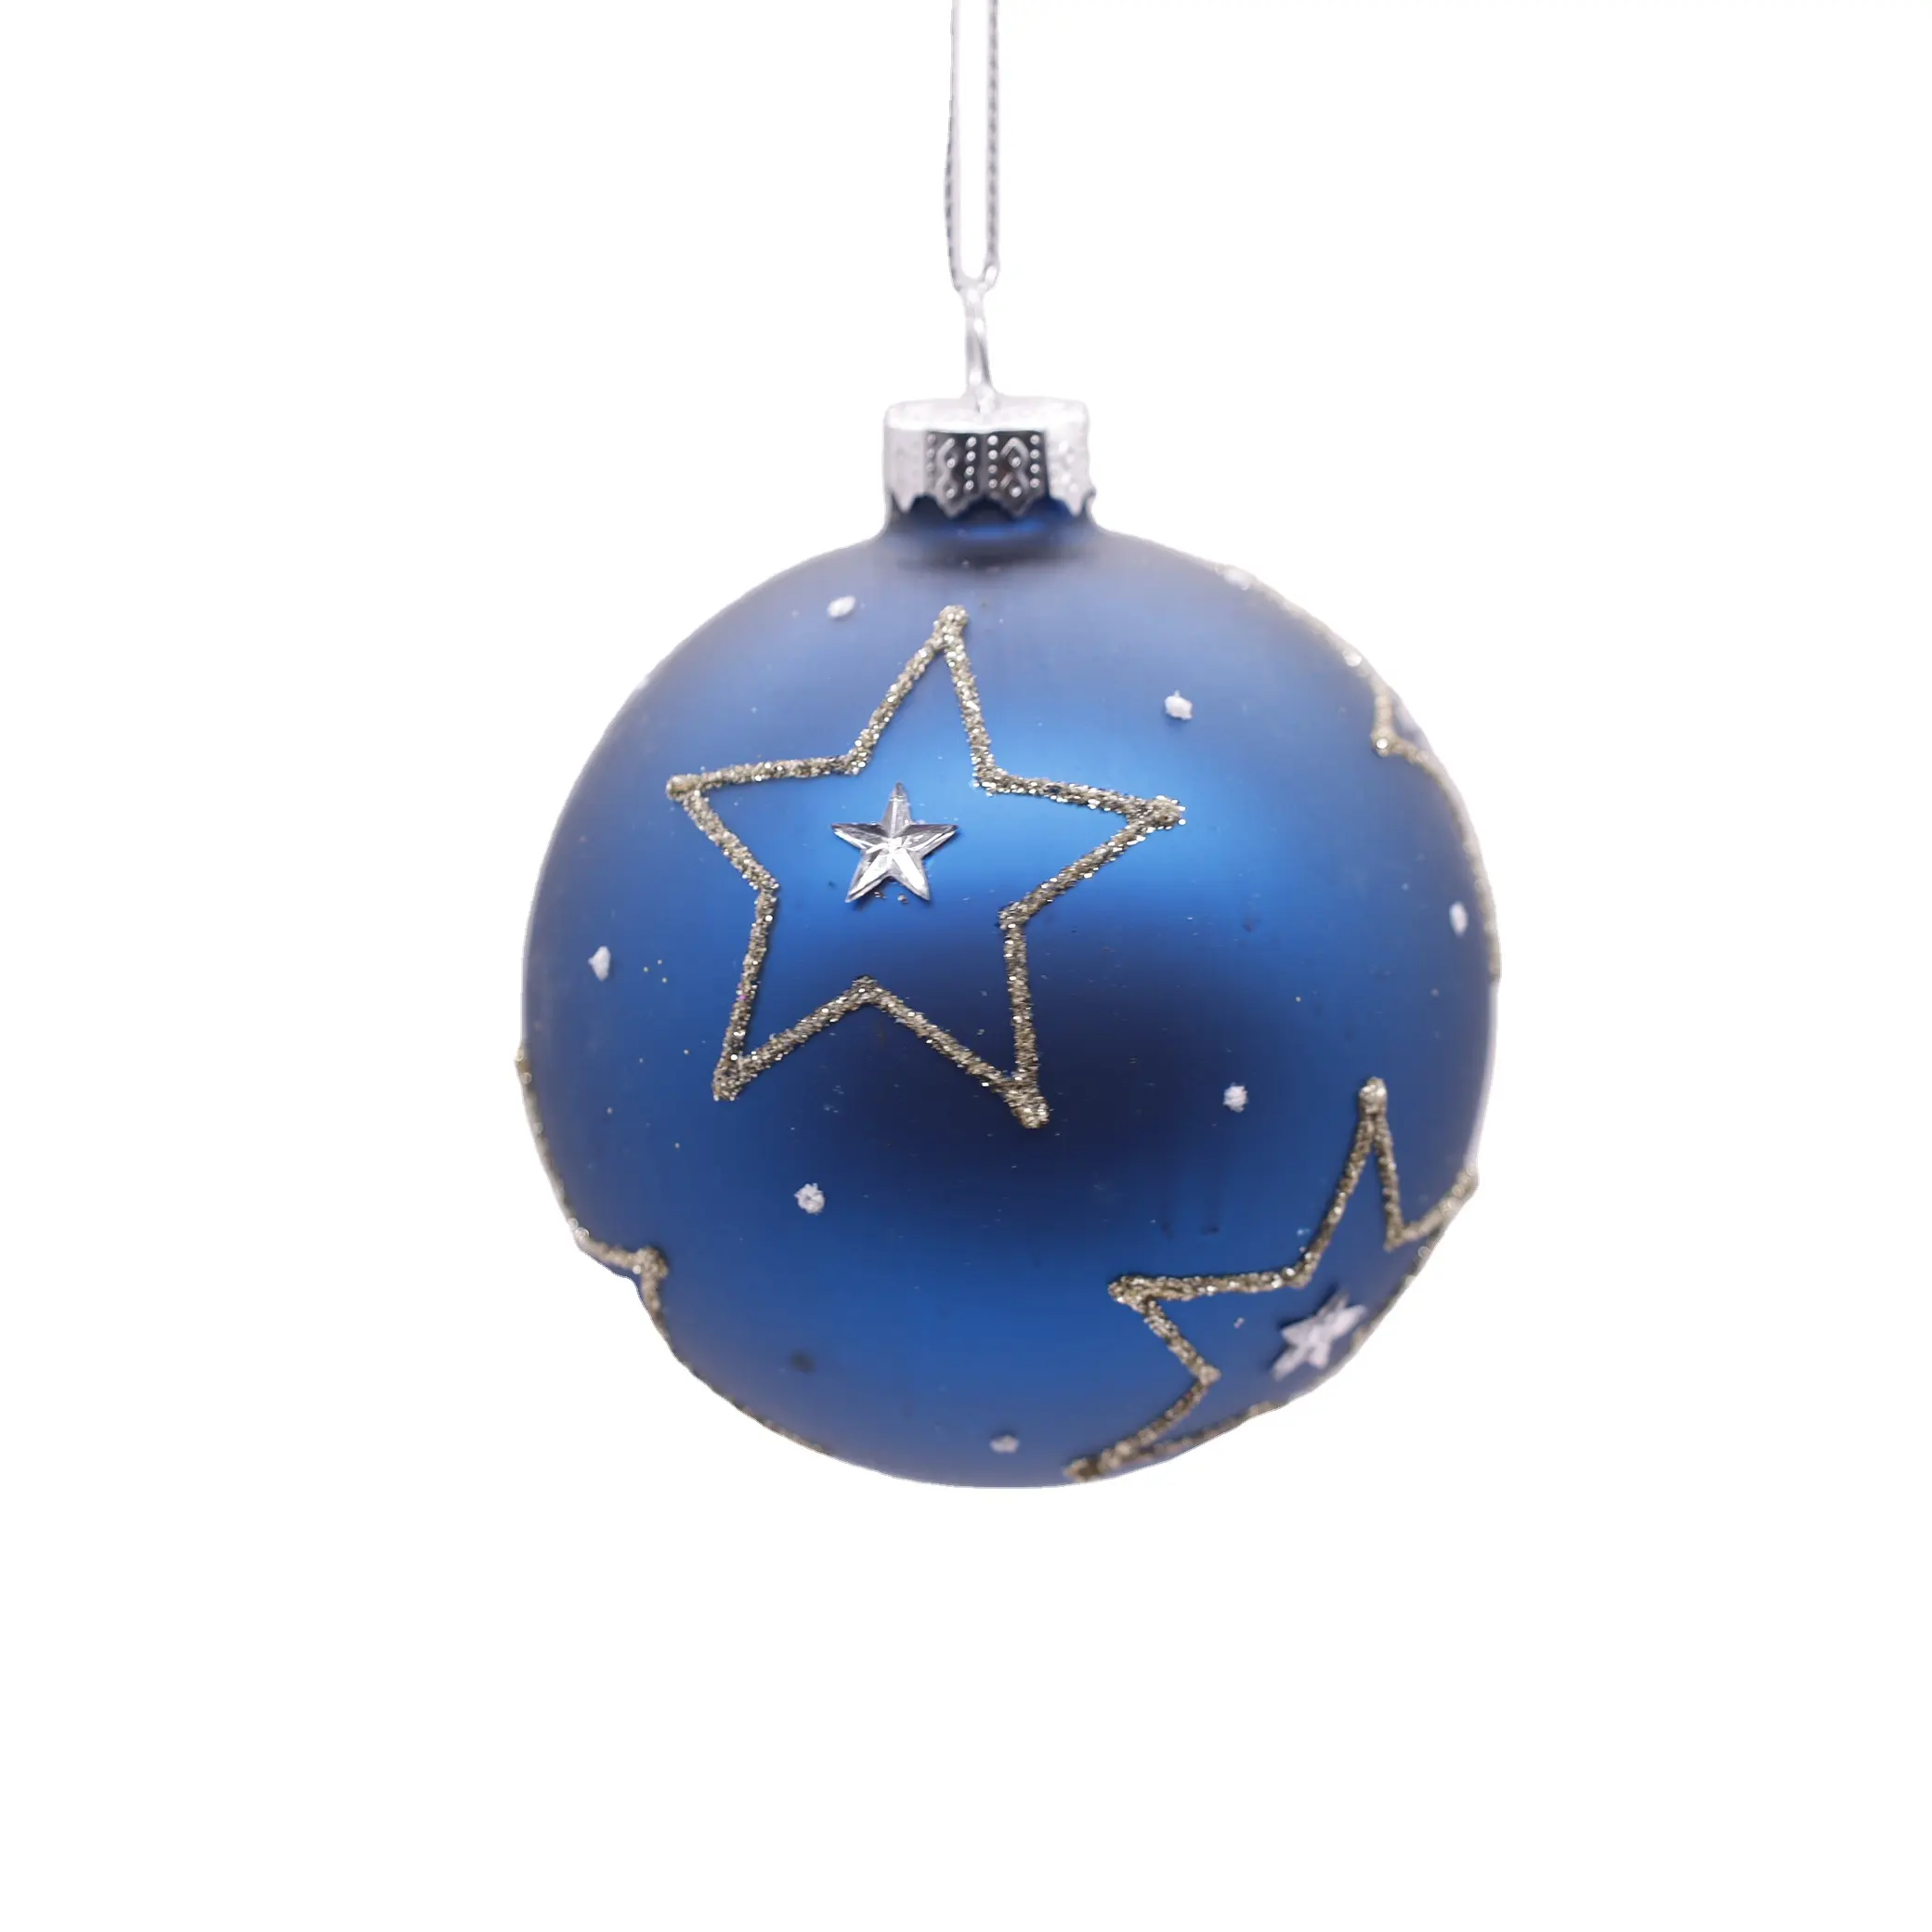 Europe Hot Selling Dark Blue Glass Ball With A Five-pointed Star Pattern Christmas Glass Ball Artifact